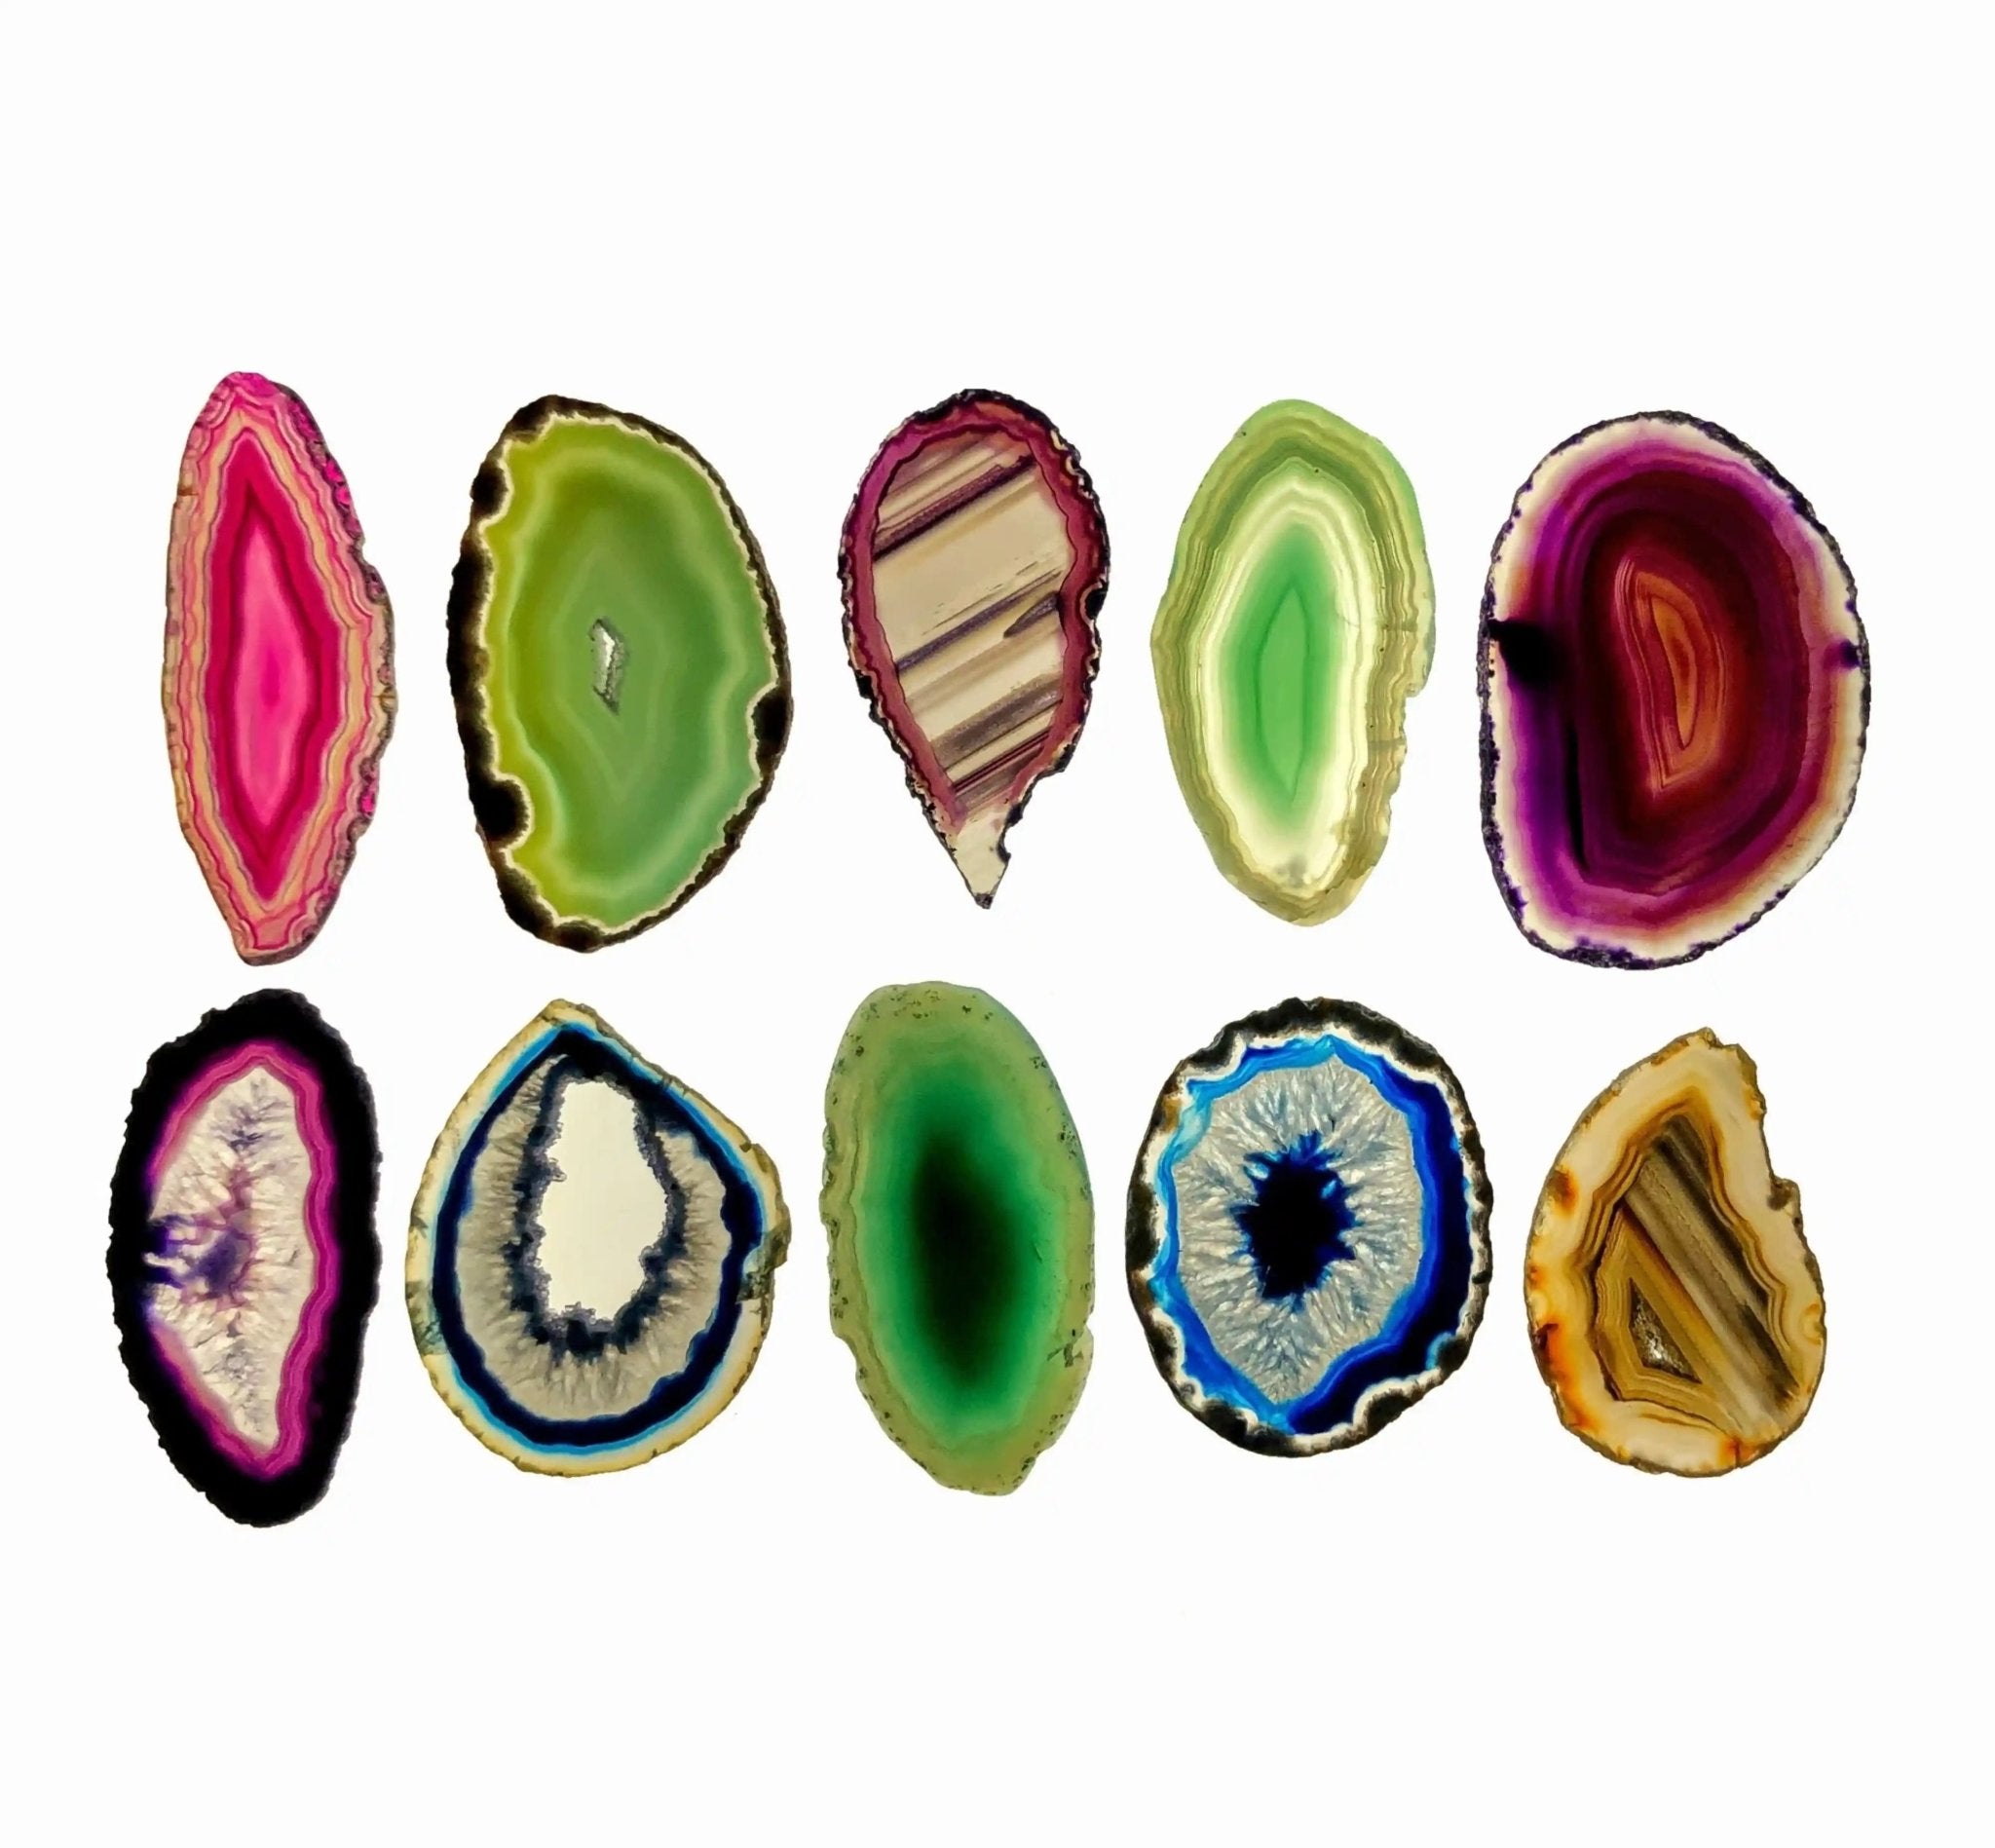 Polished Natural & Dyed Agate slices Mix, No drilled pendant hole, 1.5" to 3", 10 pieces #5054CONO - Brazil GemsBrazil GemsPolished Natural & Dyed Agate slices Mix, No drilled pendant hole, 1.5" to 3", 10 pieces #5054CONOSlices for Crafts5054CONO